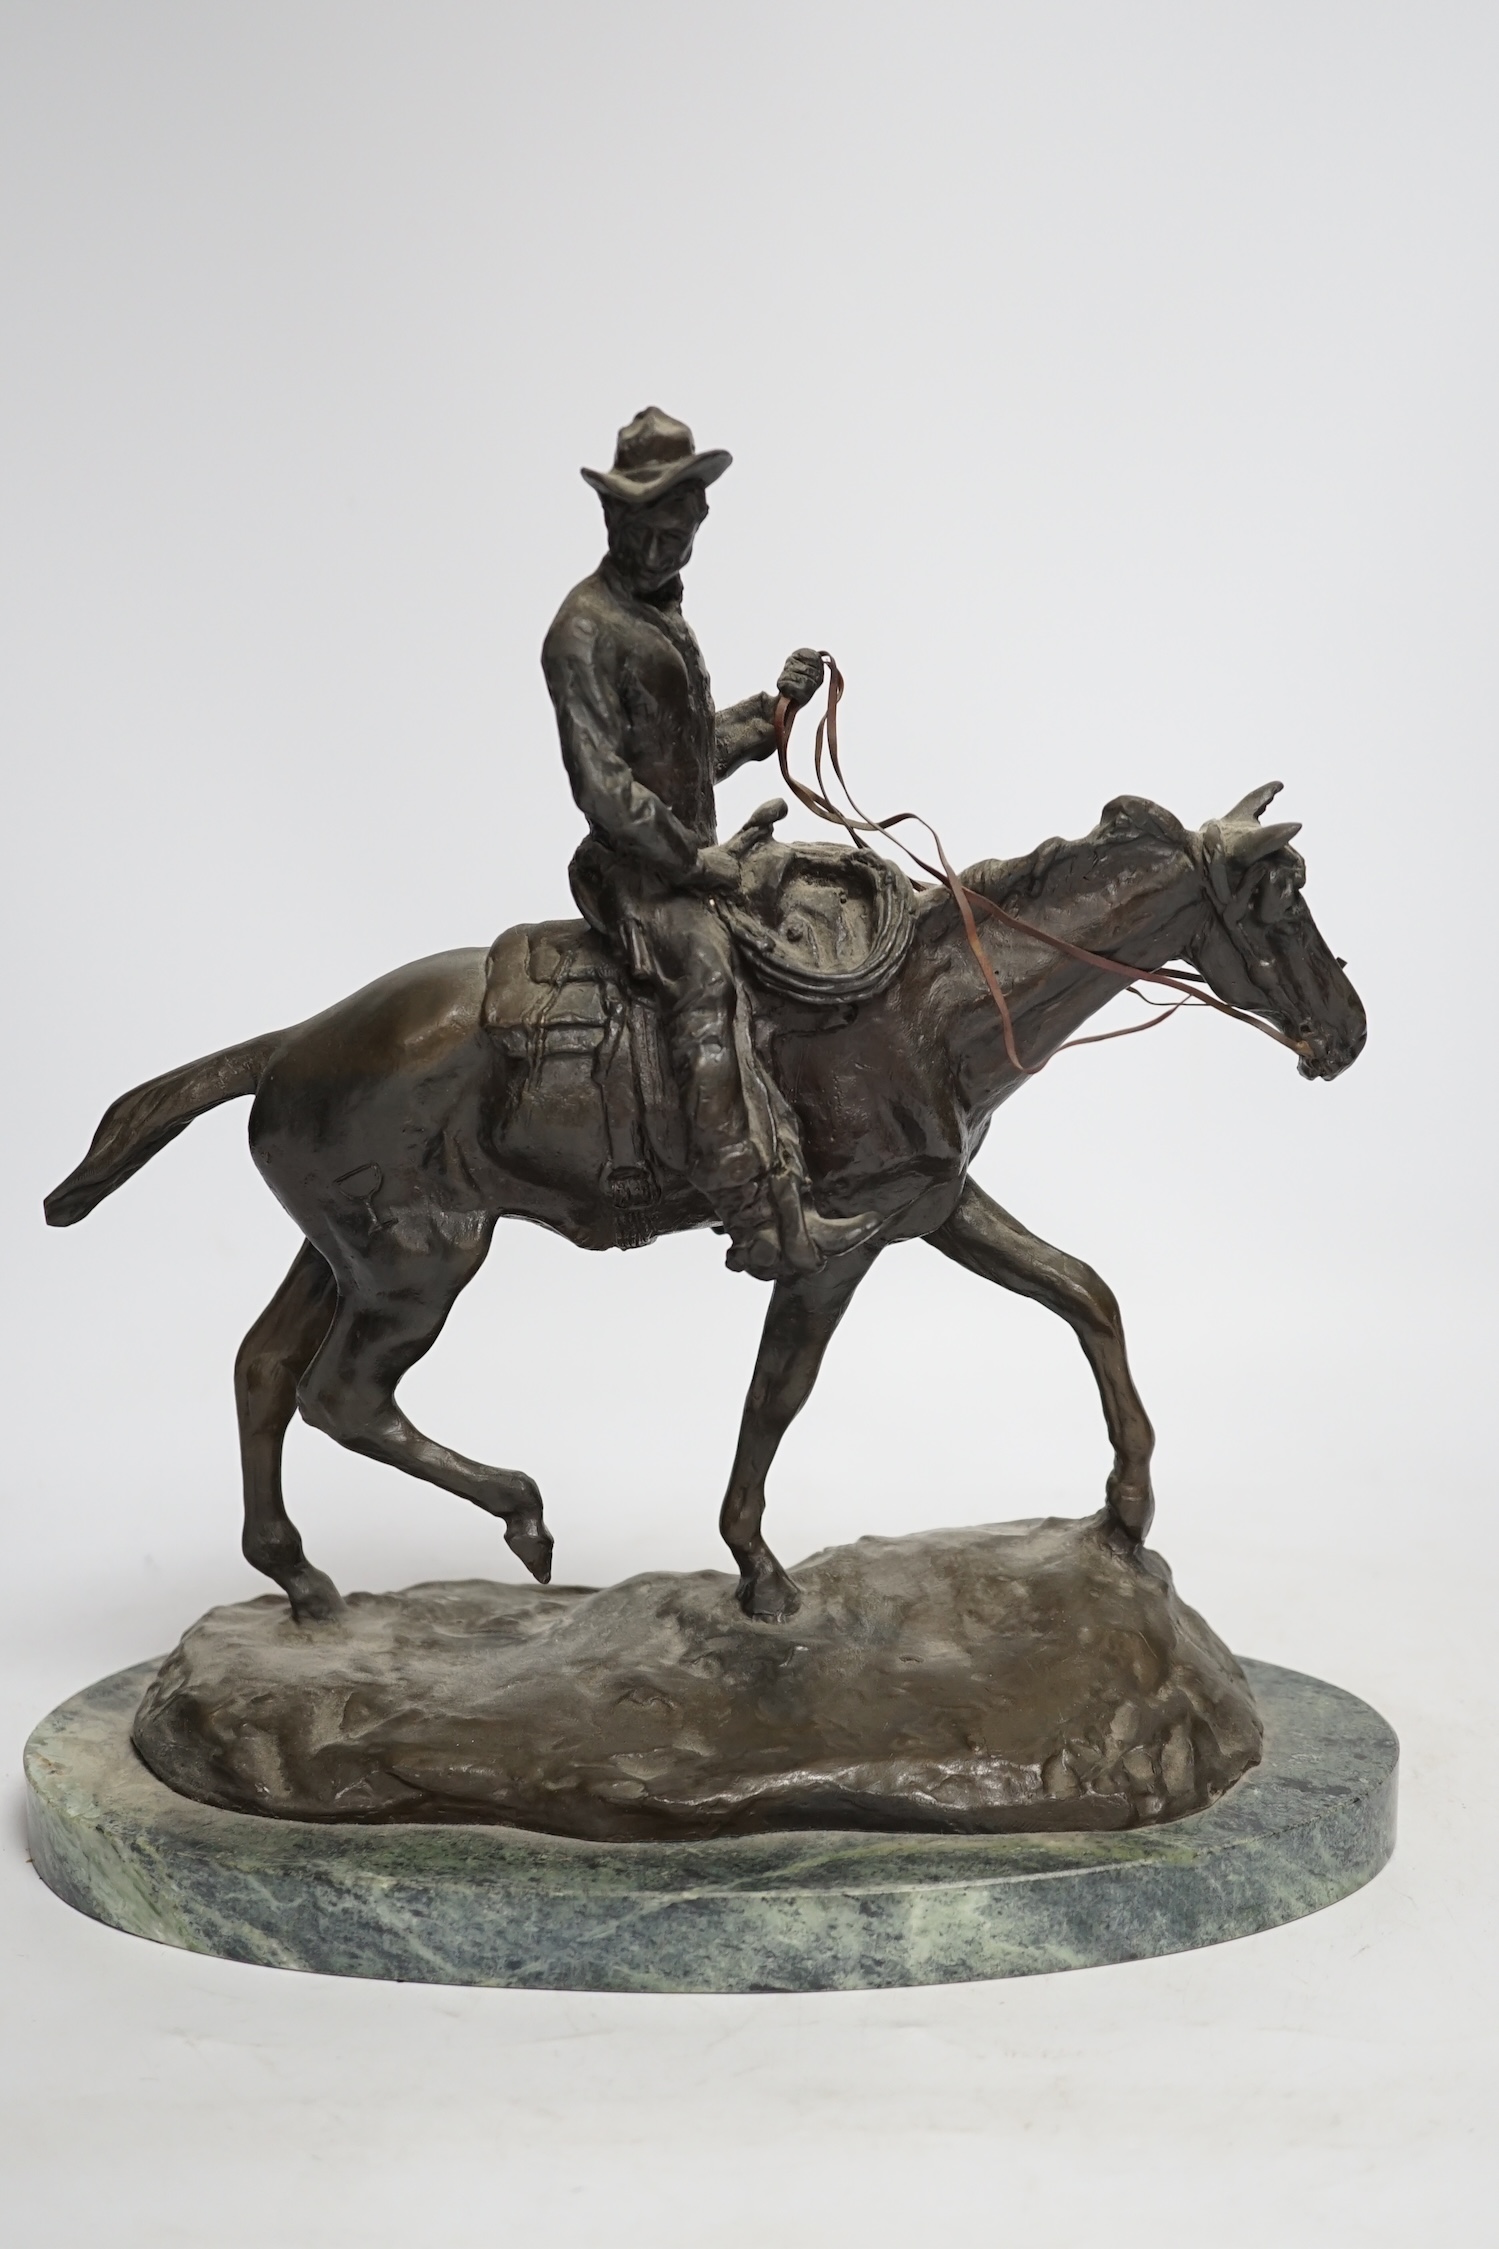 After Charles Marian Russell, a bronze group of Will Rogers, 29cm high